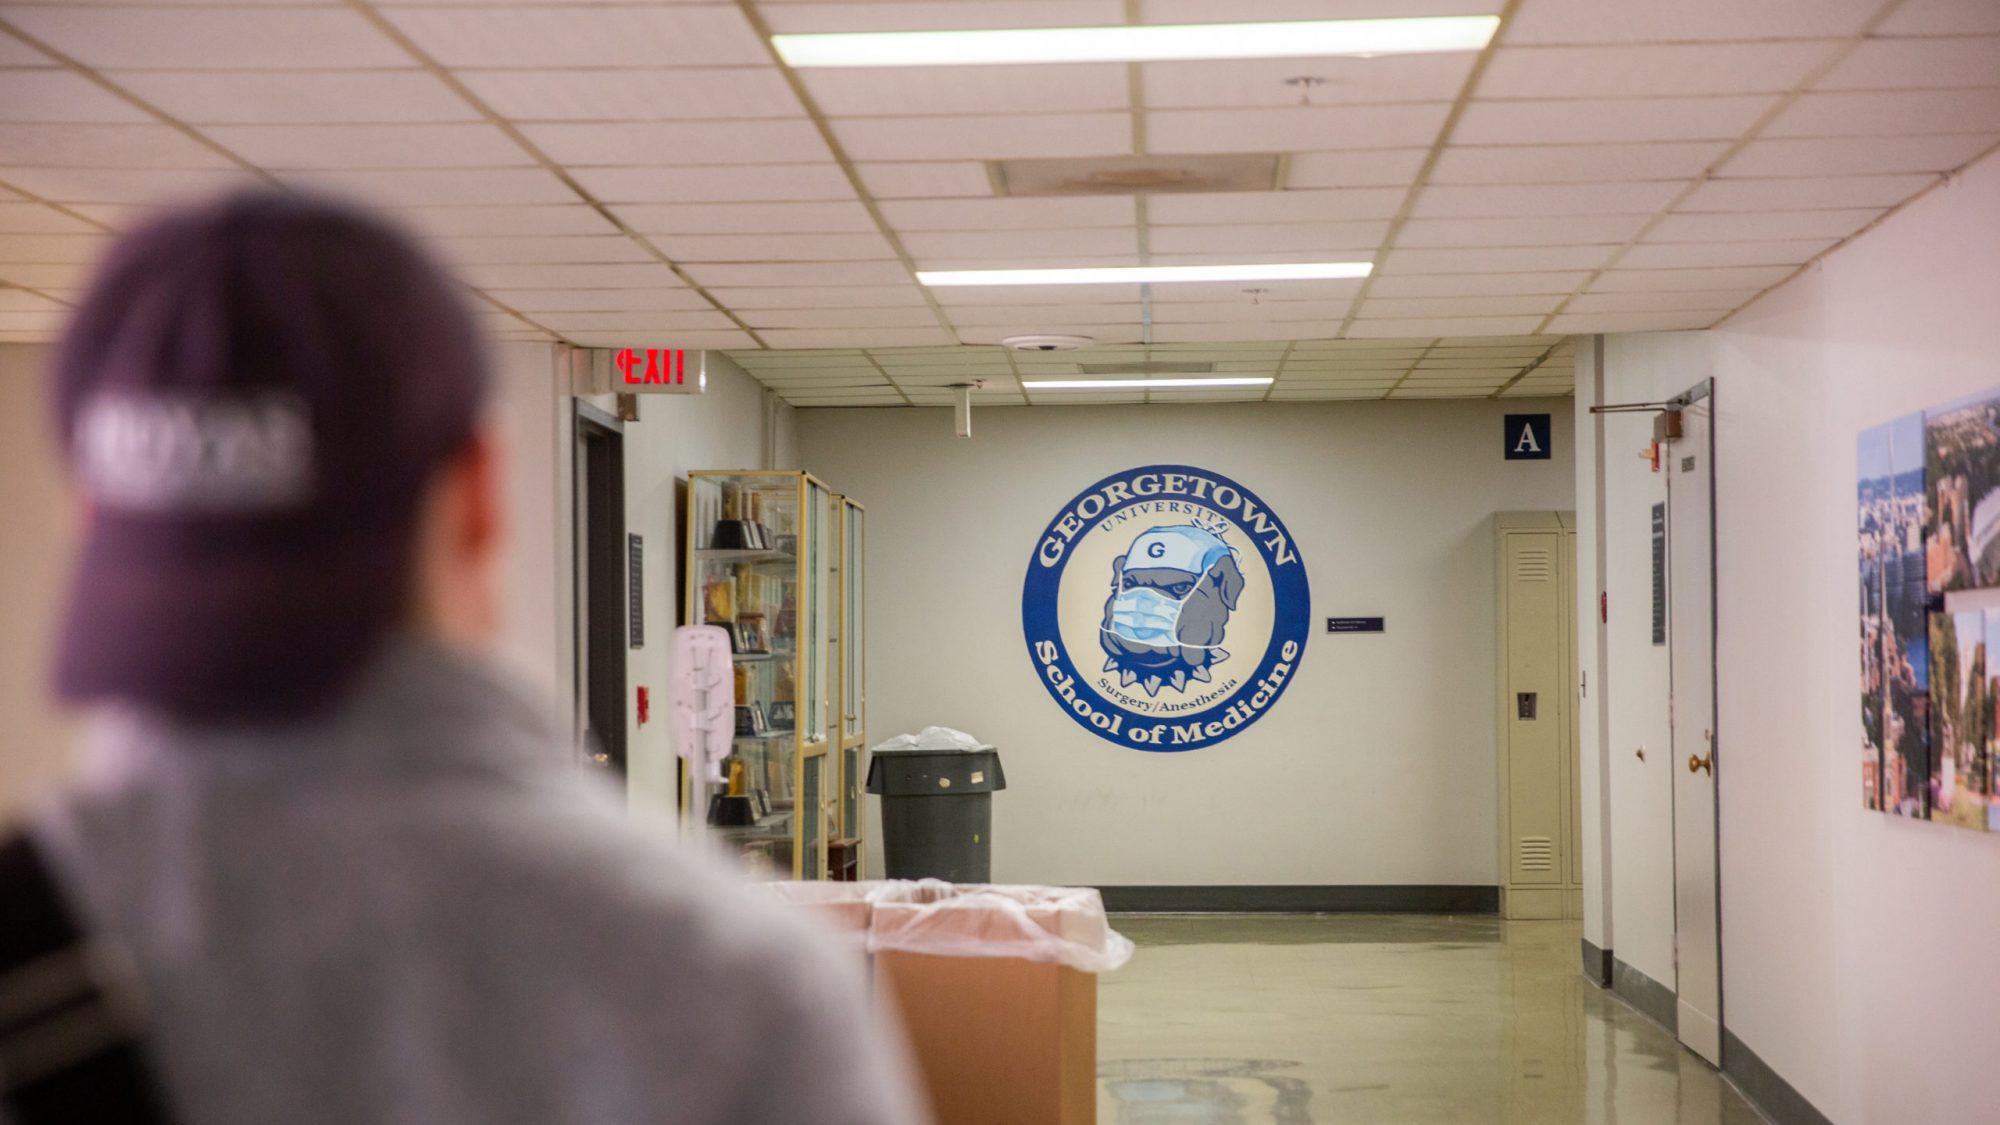 A student with a blue hat on backwards walks down a hallway, at the end of which a logo for the School of Medicine is painted on the wall.